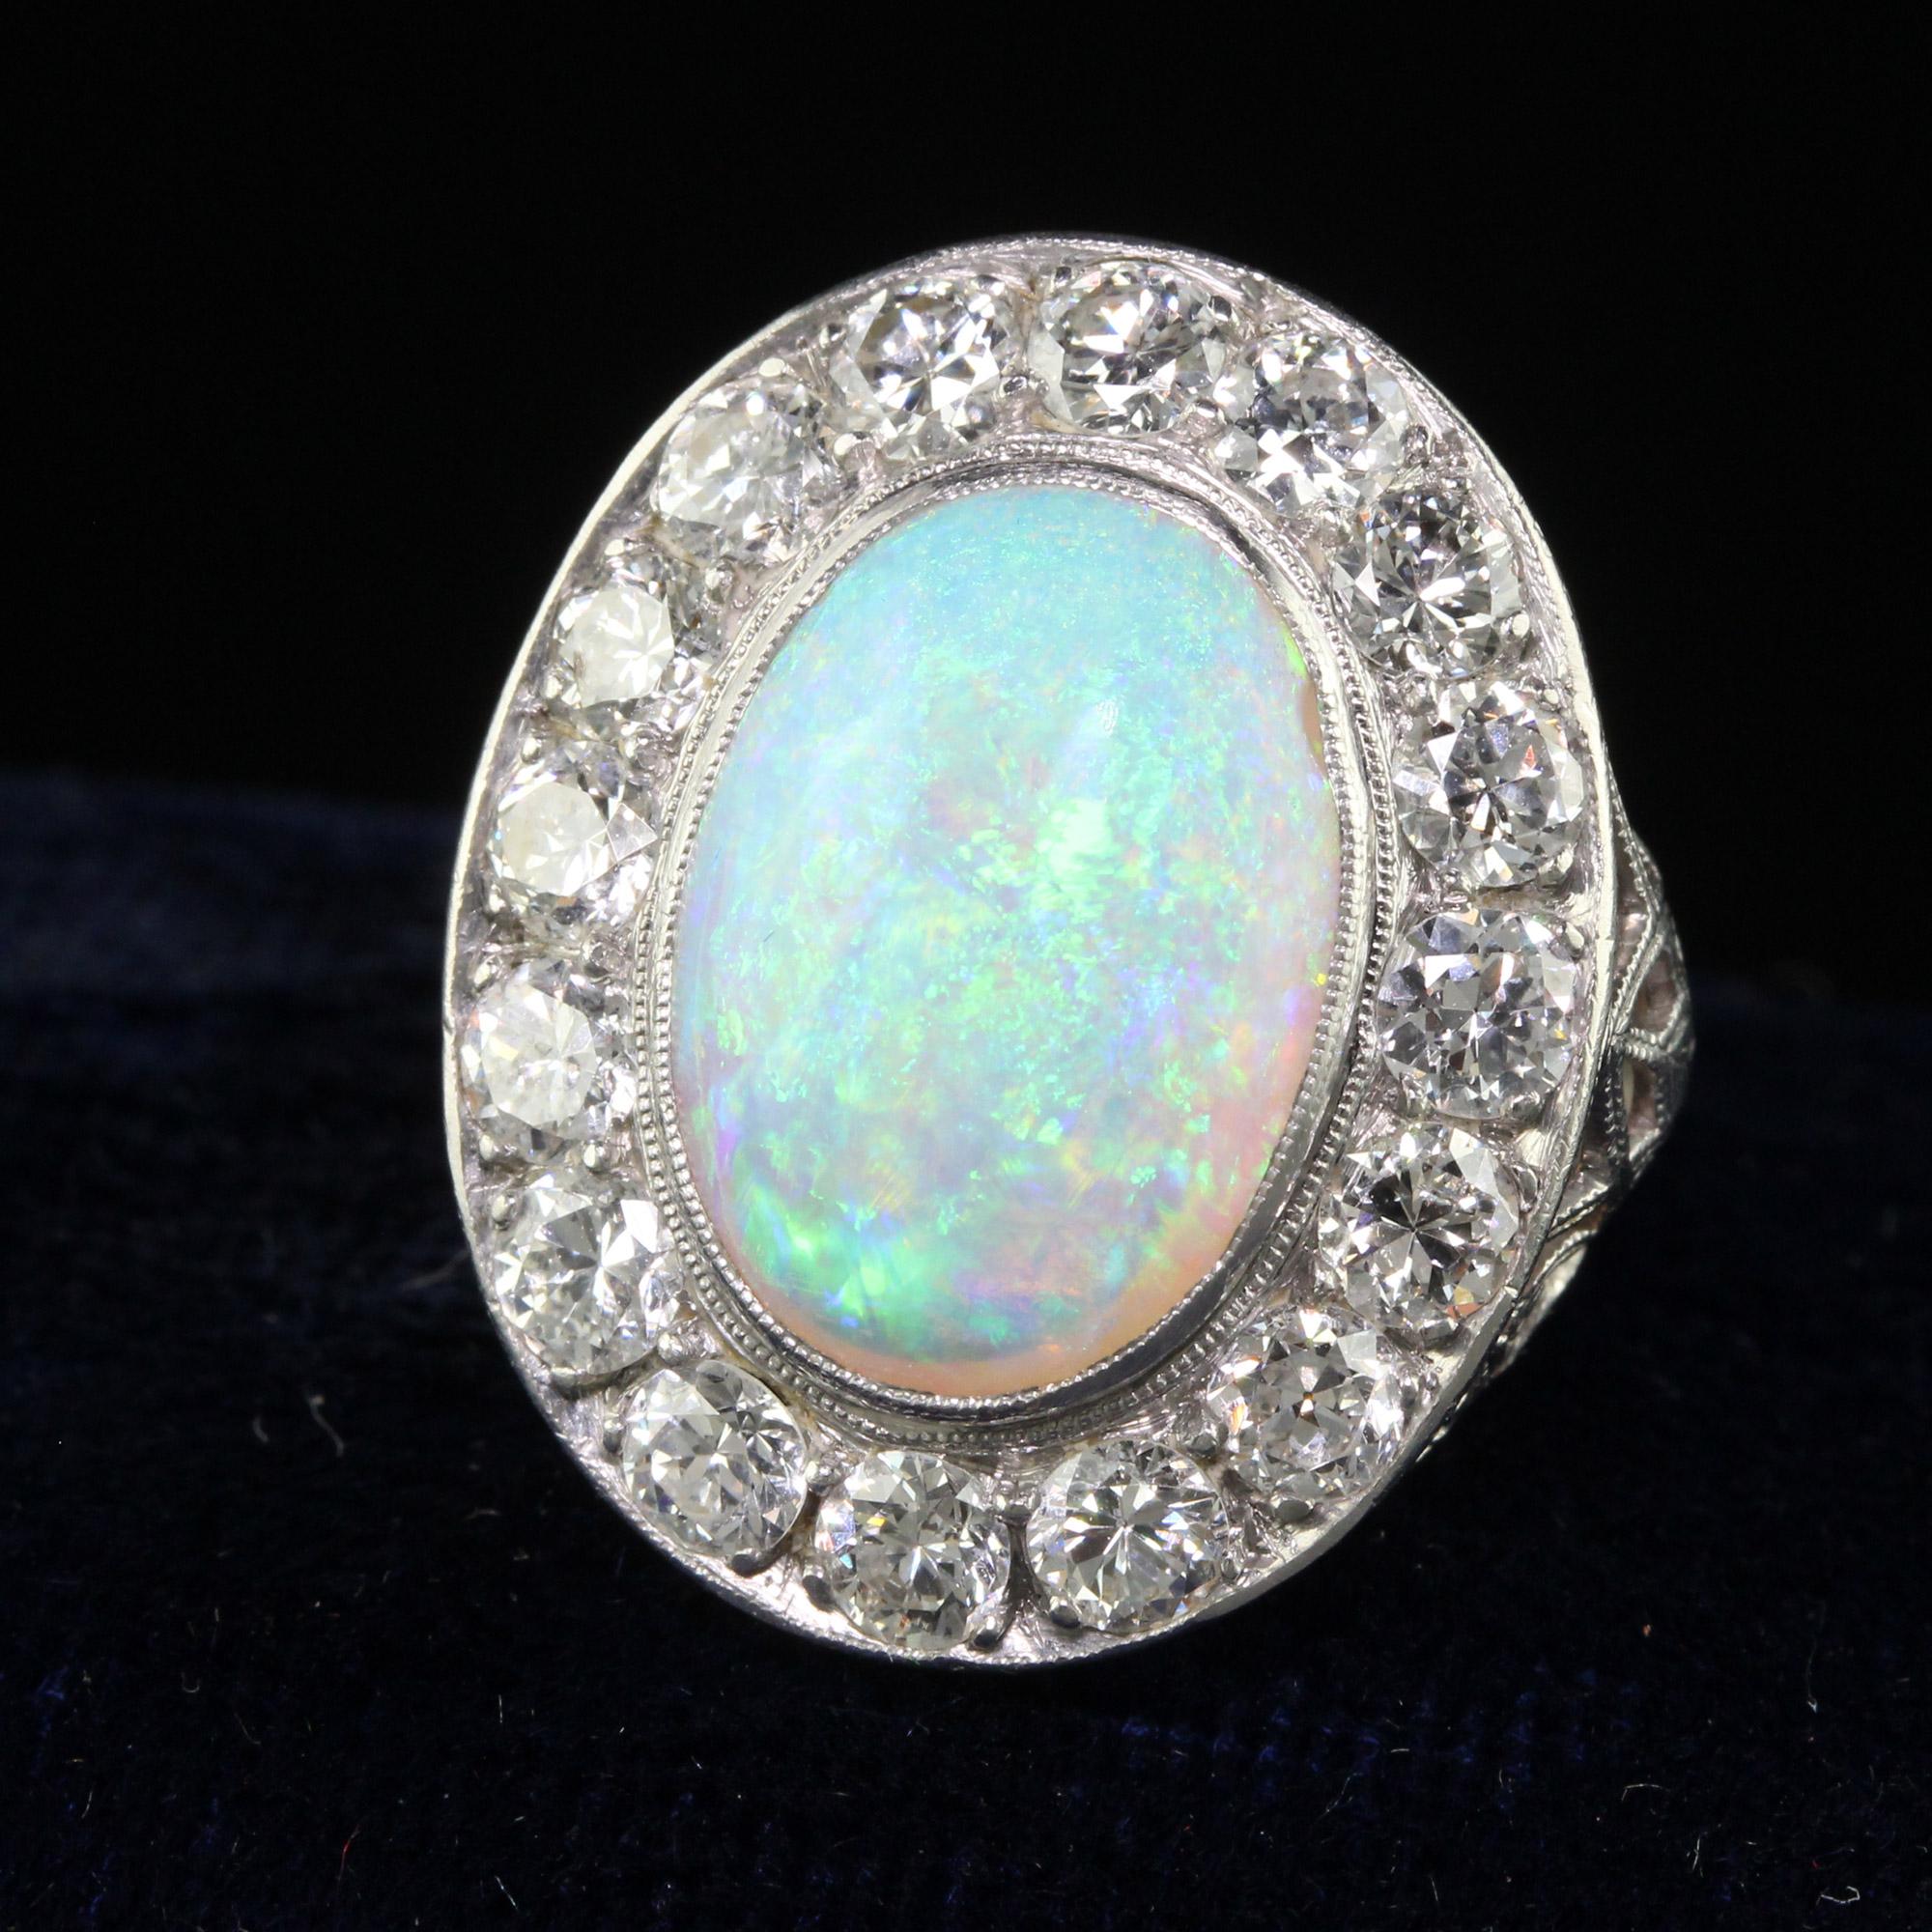 Beautiful Antique Art Deco Platinum Opal and Old Euro Diamond Halo Ring. This gorgeous art deco cocktail ring is crafted in platinum. The center holds a natural opal with a beautiful play of color. The center opal is surrounded by white old European